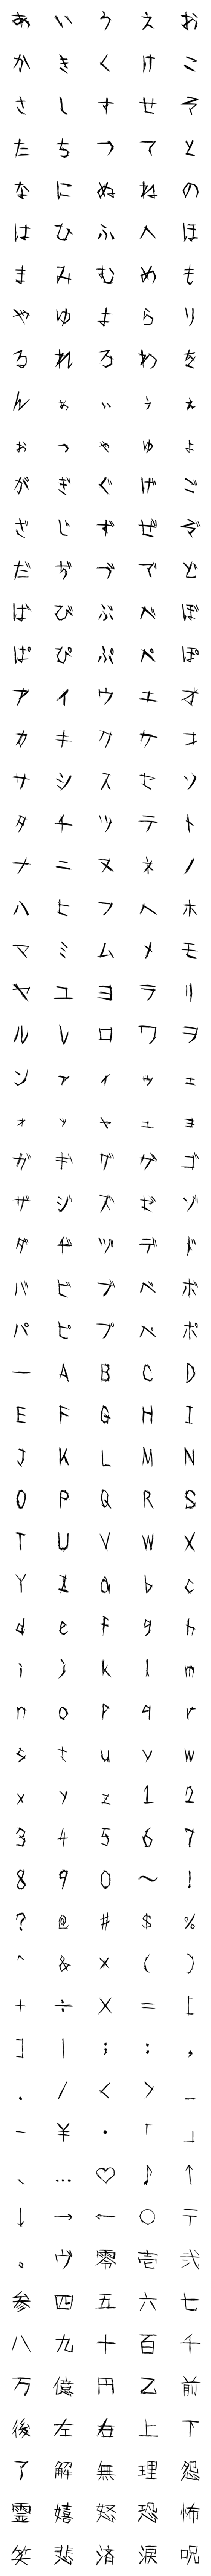 [LINE絵文字]怖い文字の画像一覧